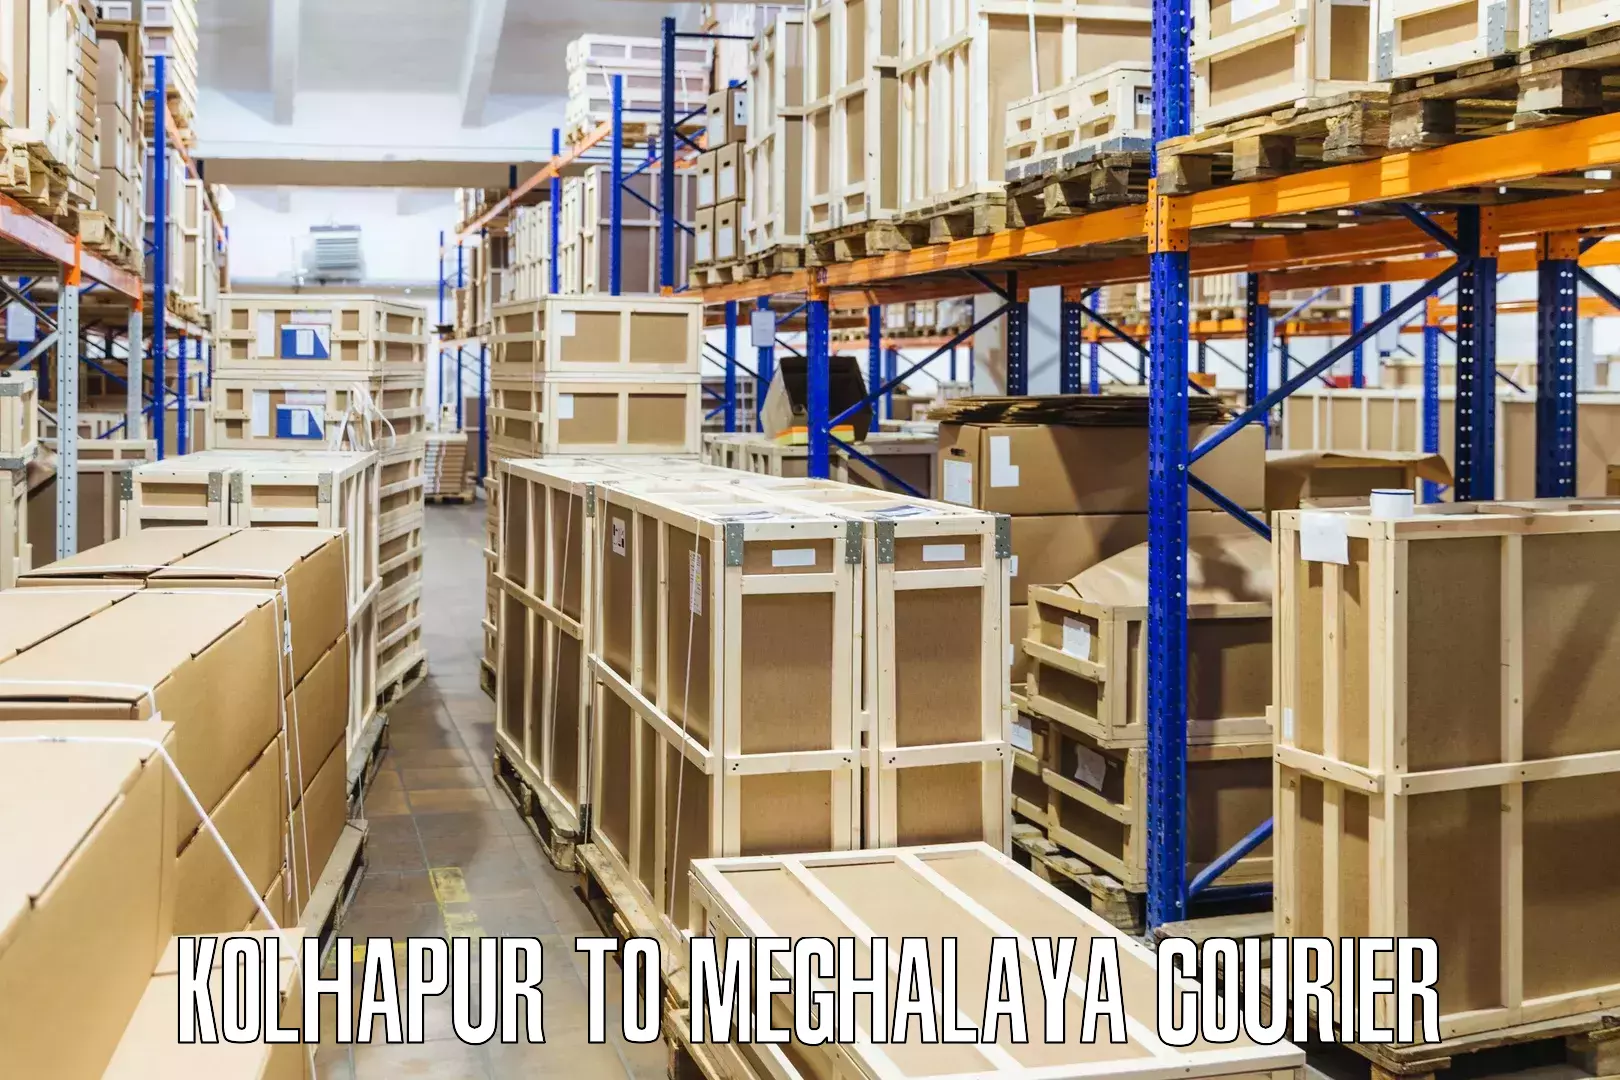 Courier service booking in Kolhapur to Meghalaya